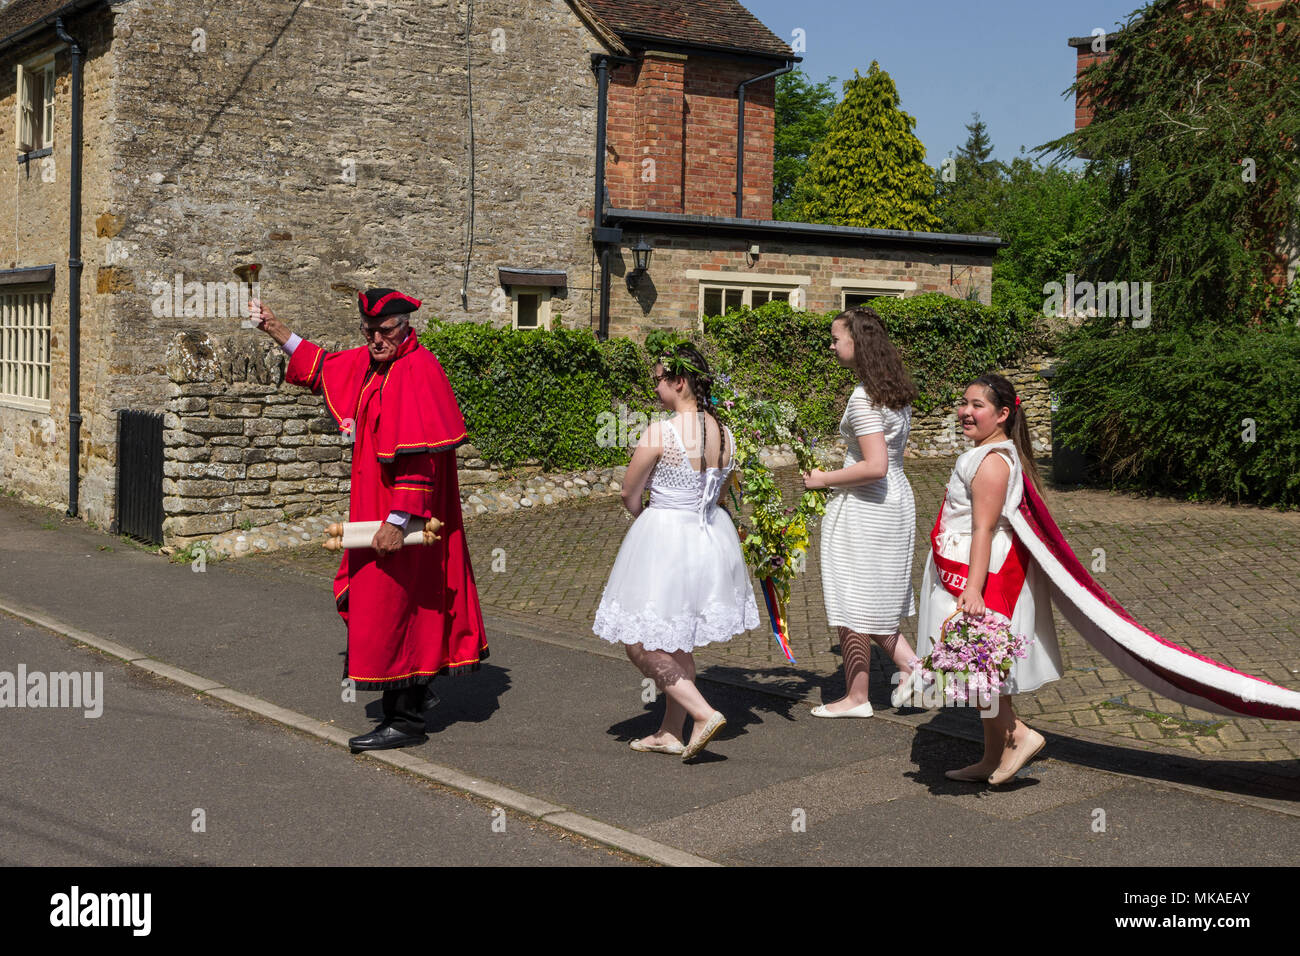 Quinton, Northamptonshire, UK 7th May 2018. Following a procession from the village hall led by a Town Crier/Bellman, this year's May Queen Samantha Childs, was crowned at a ceremony on the village green. The village has records of this event going back some 60 years. Credit: David Humphreys/Alamy Live News Stock Photo